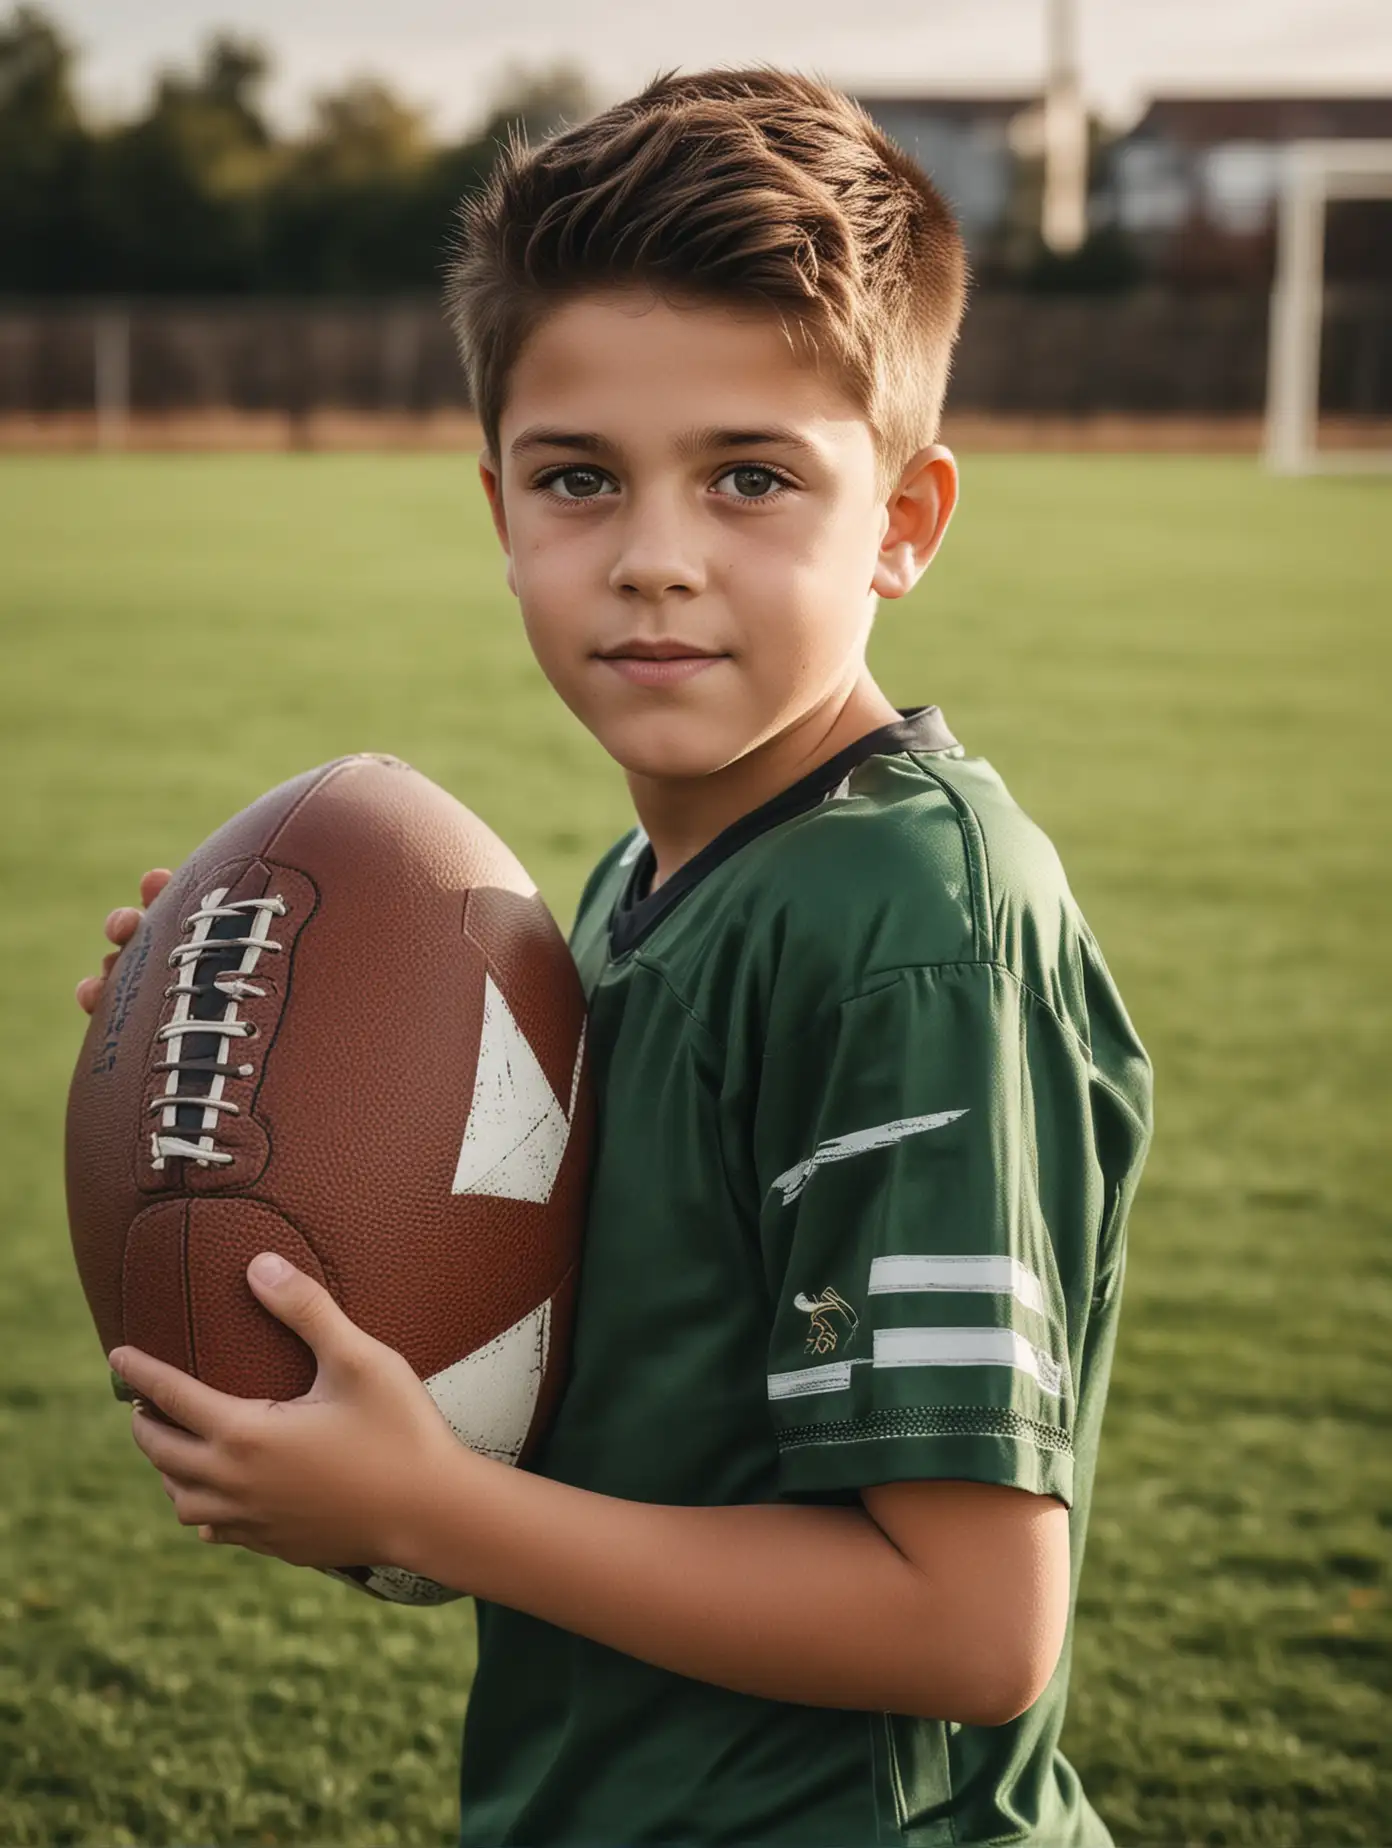 A child of about 12 years old is holding a football, facing the camera, with exquisite facial features, with the football field as the background, professional photography technology